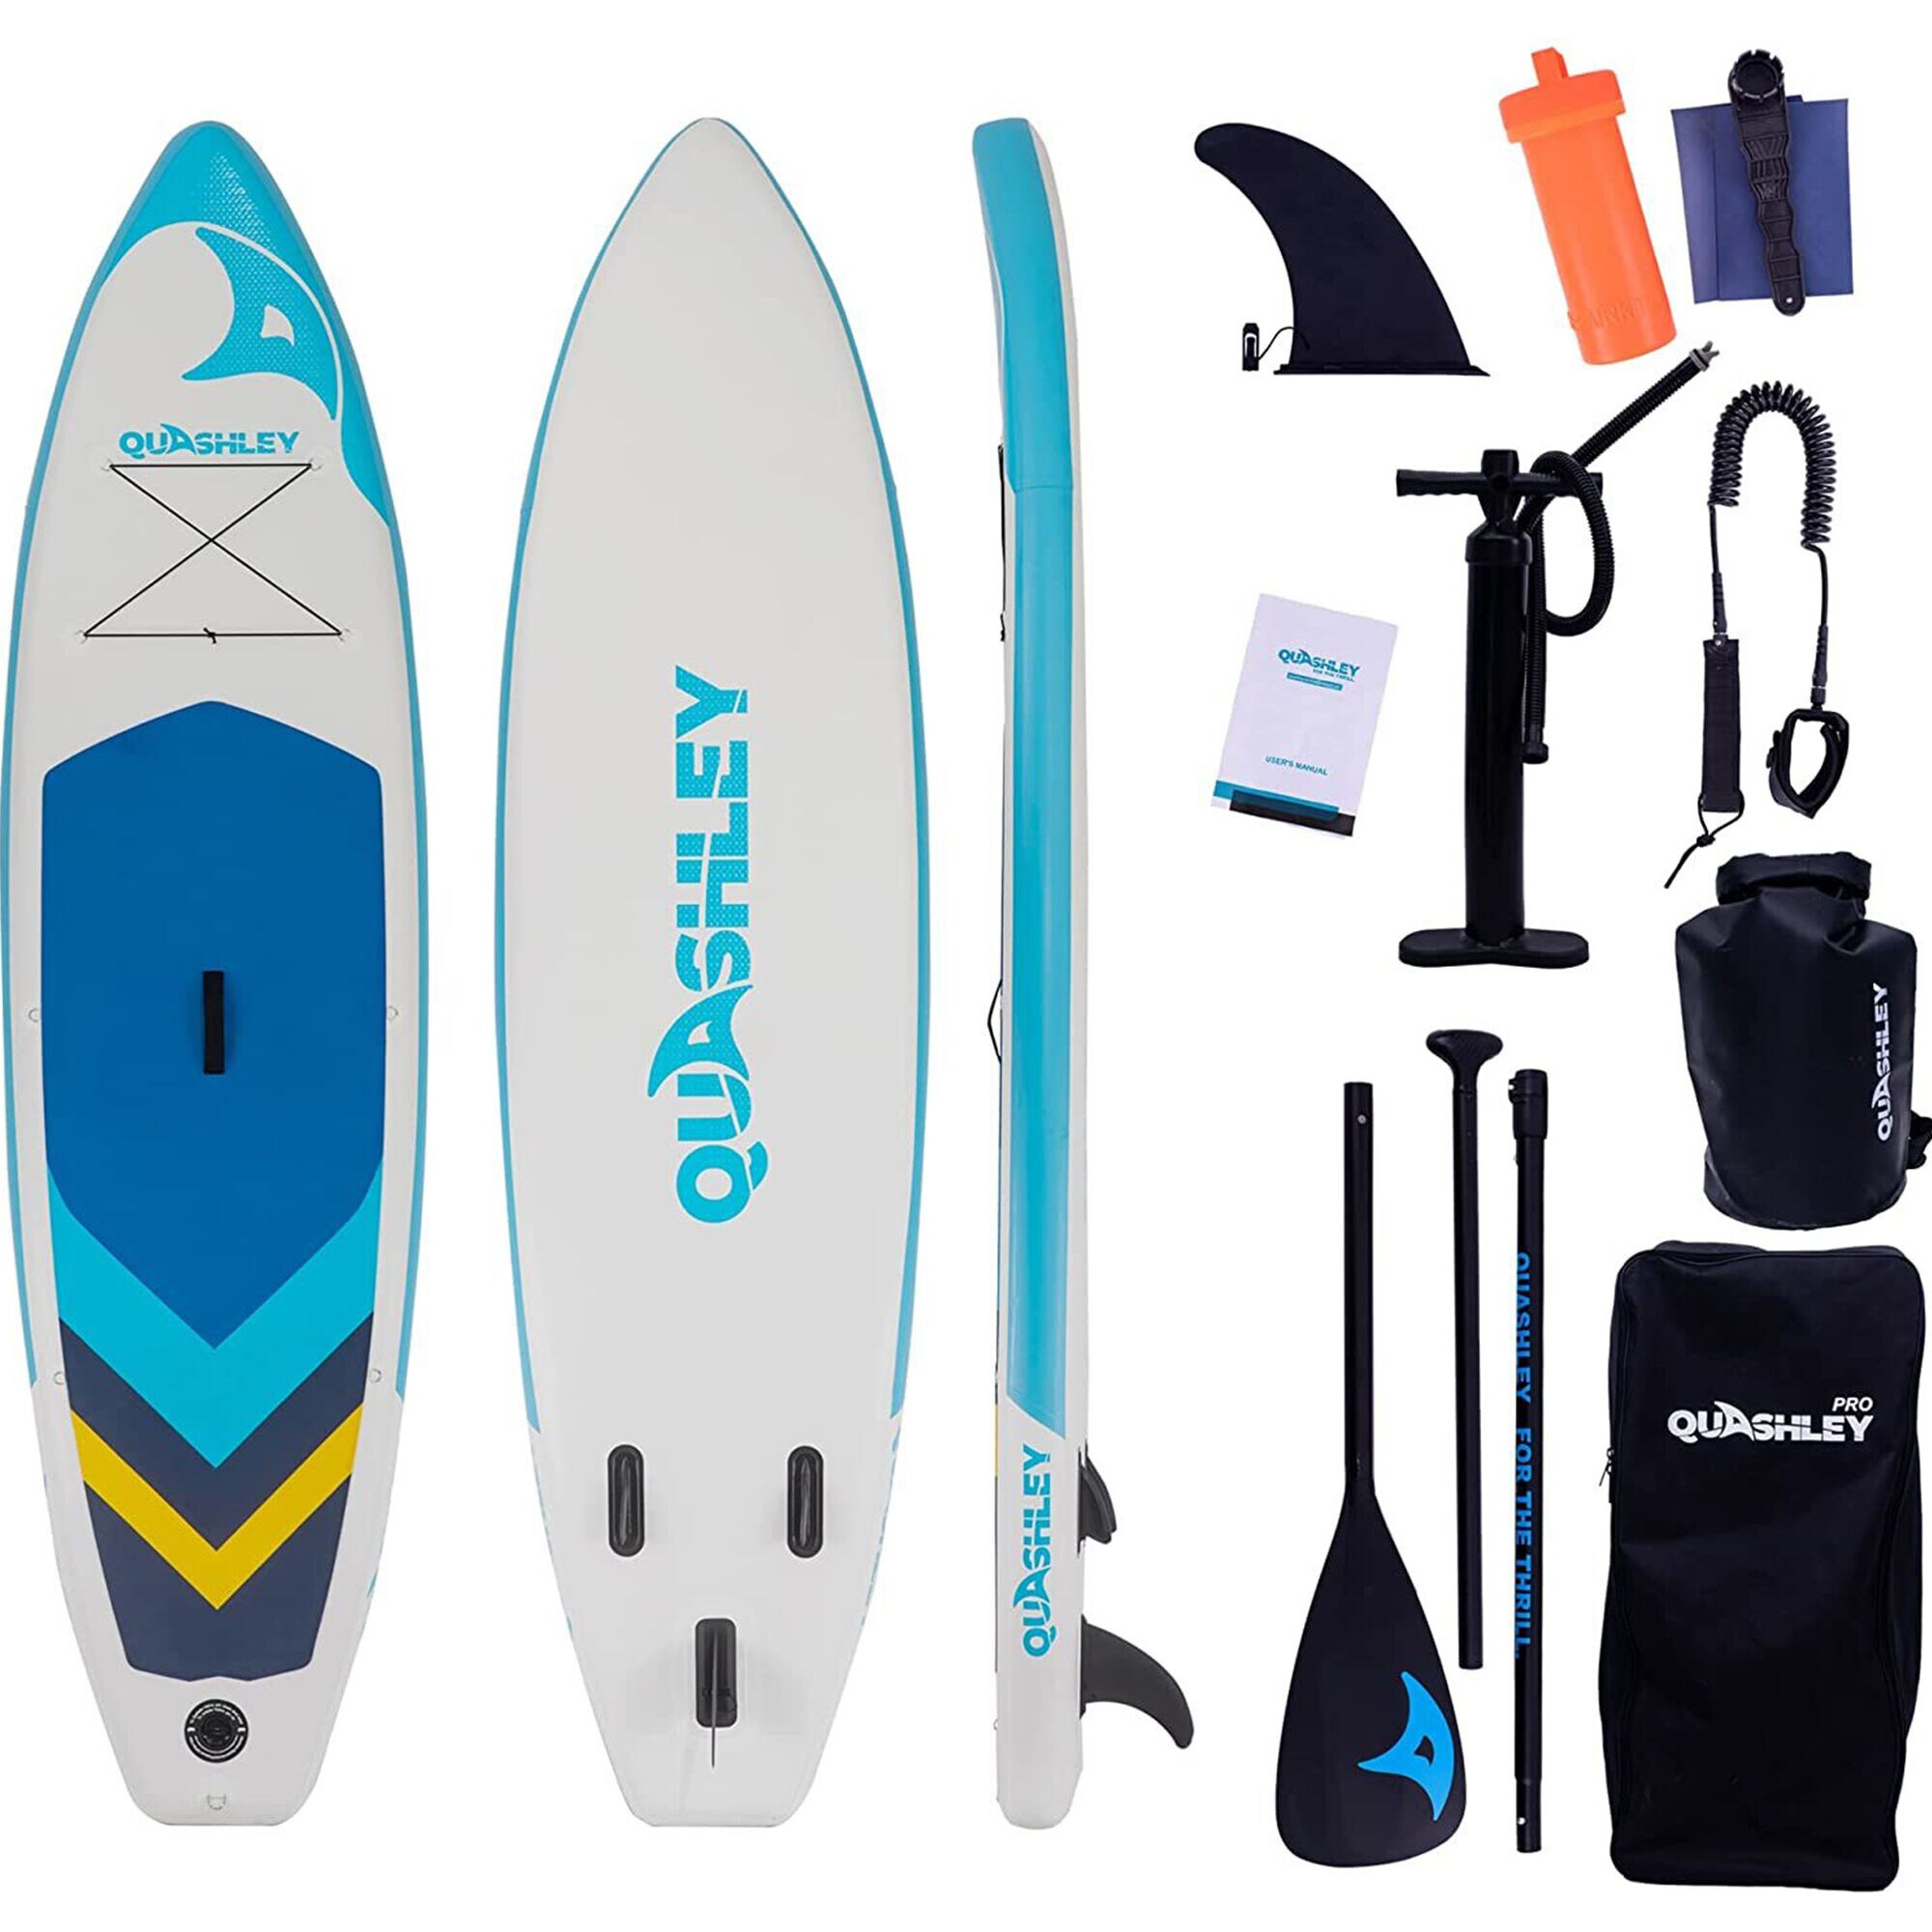 Wildaven 11-ft Inflatable Stand Up Paddle Board 1 in the Stand Up ...